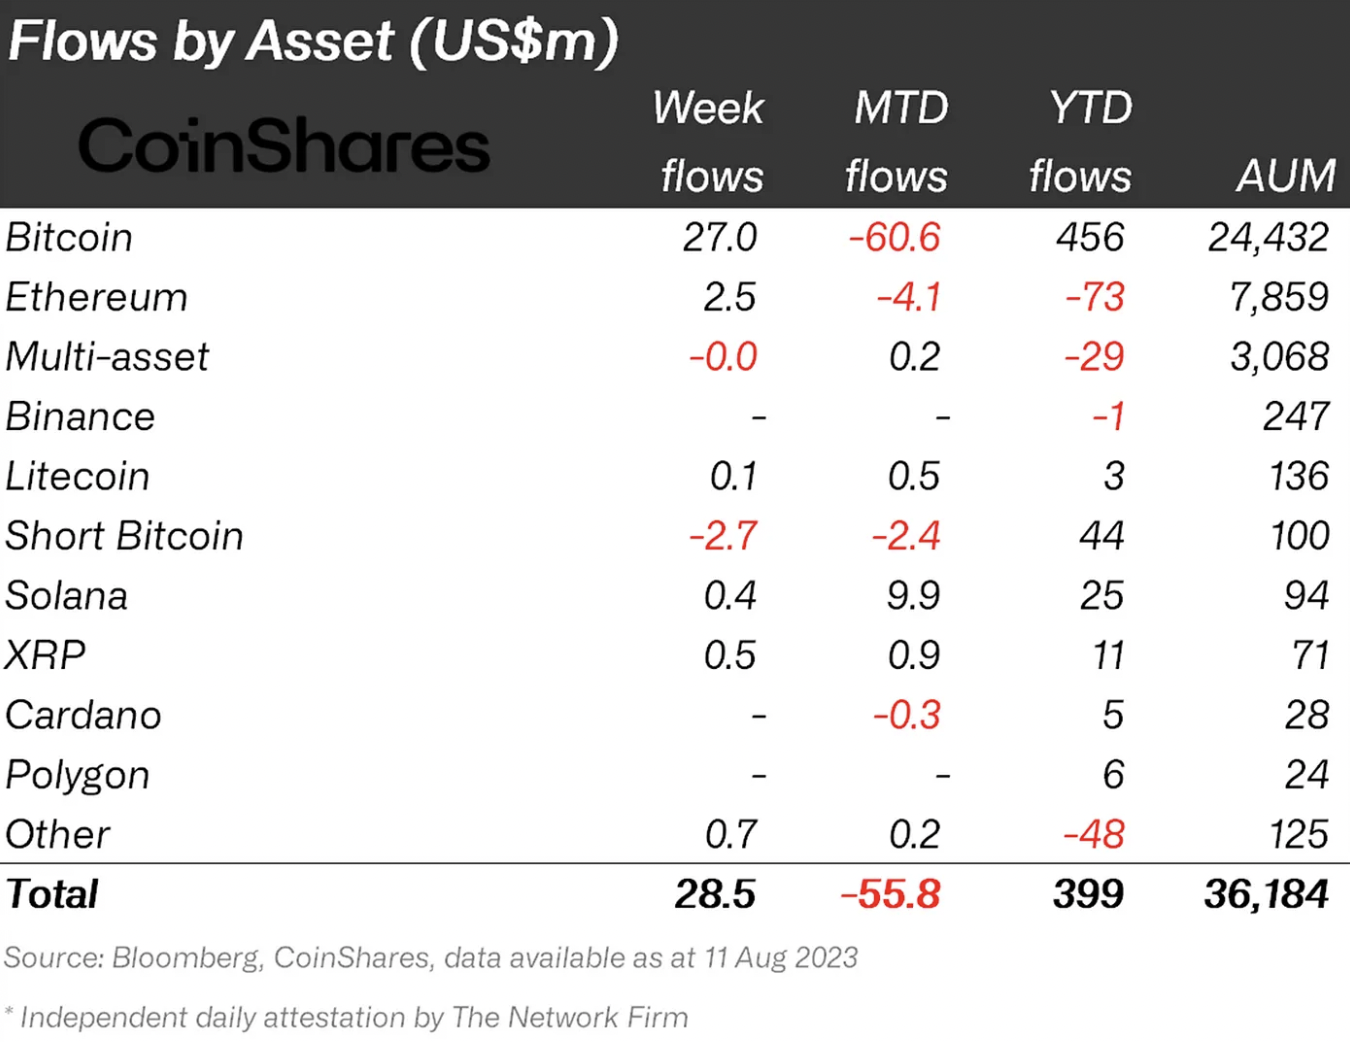 Fund flows by assets as seen in the CoinShares report